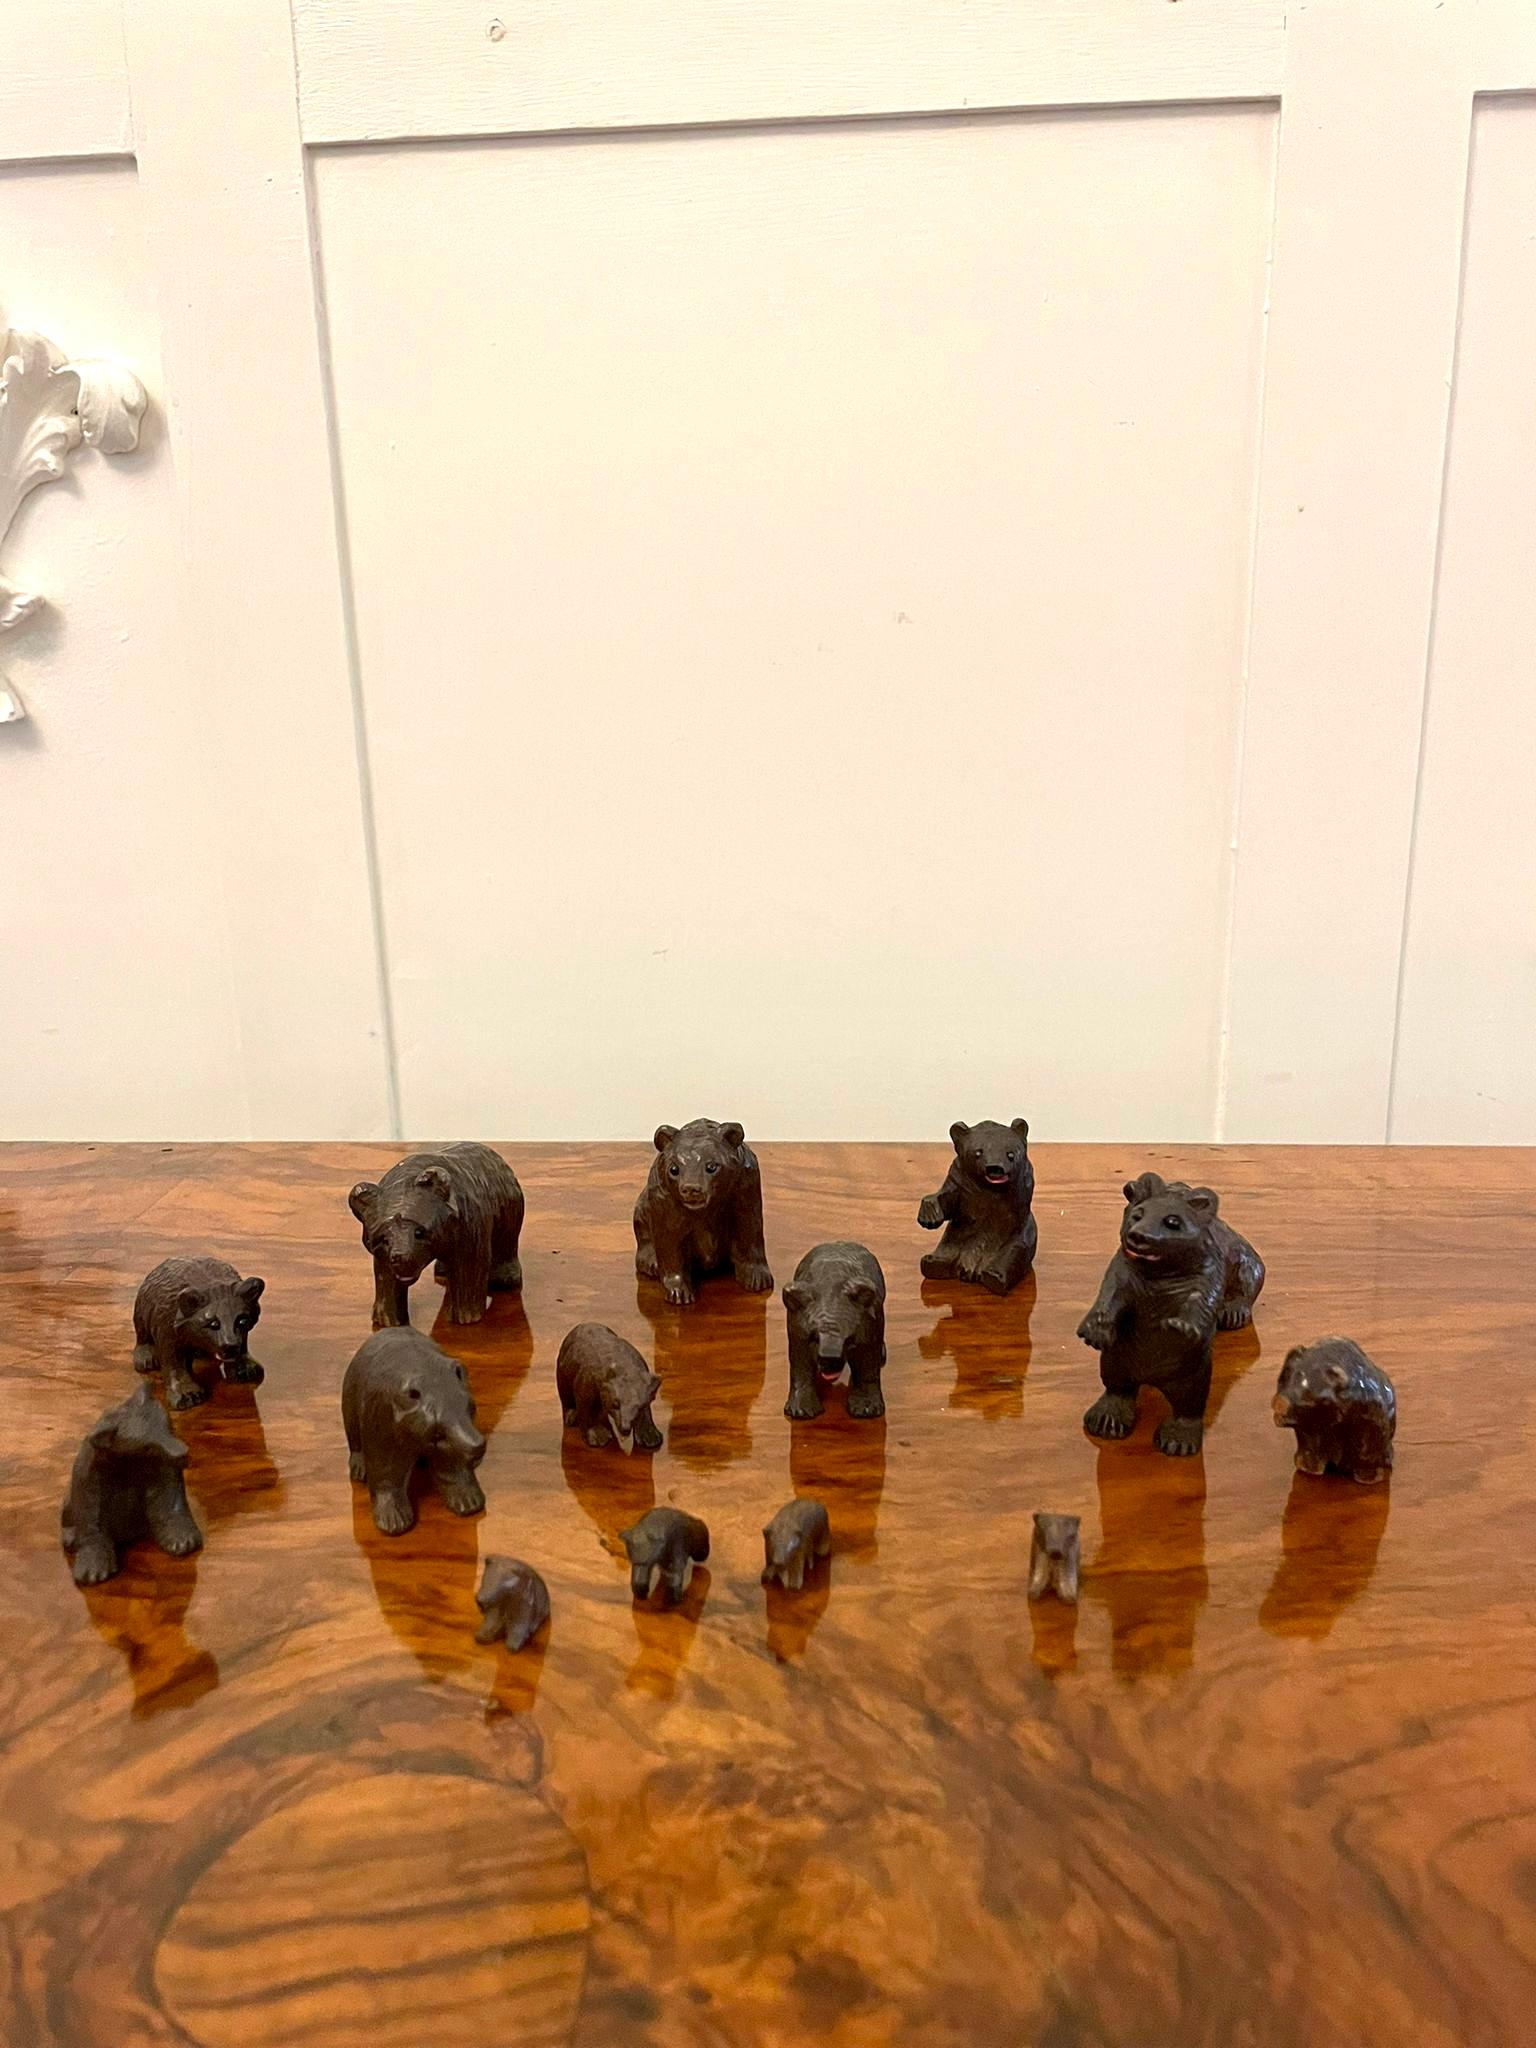 Antique set of Fifteen 19th century miniature carved black forest bears some standing, some sitting down, some with original glass eyes and in fabulous original condition.
 
A charming collection with splendid quality carving. A fabulous examples